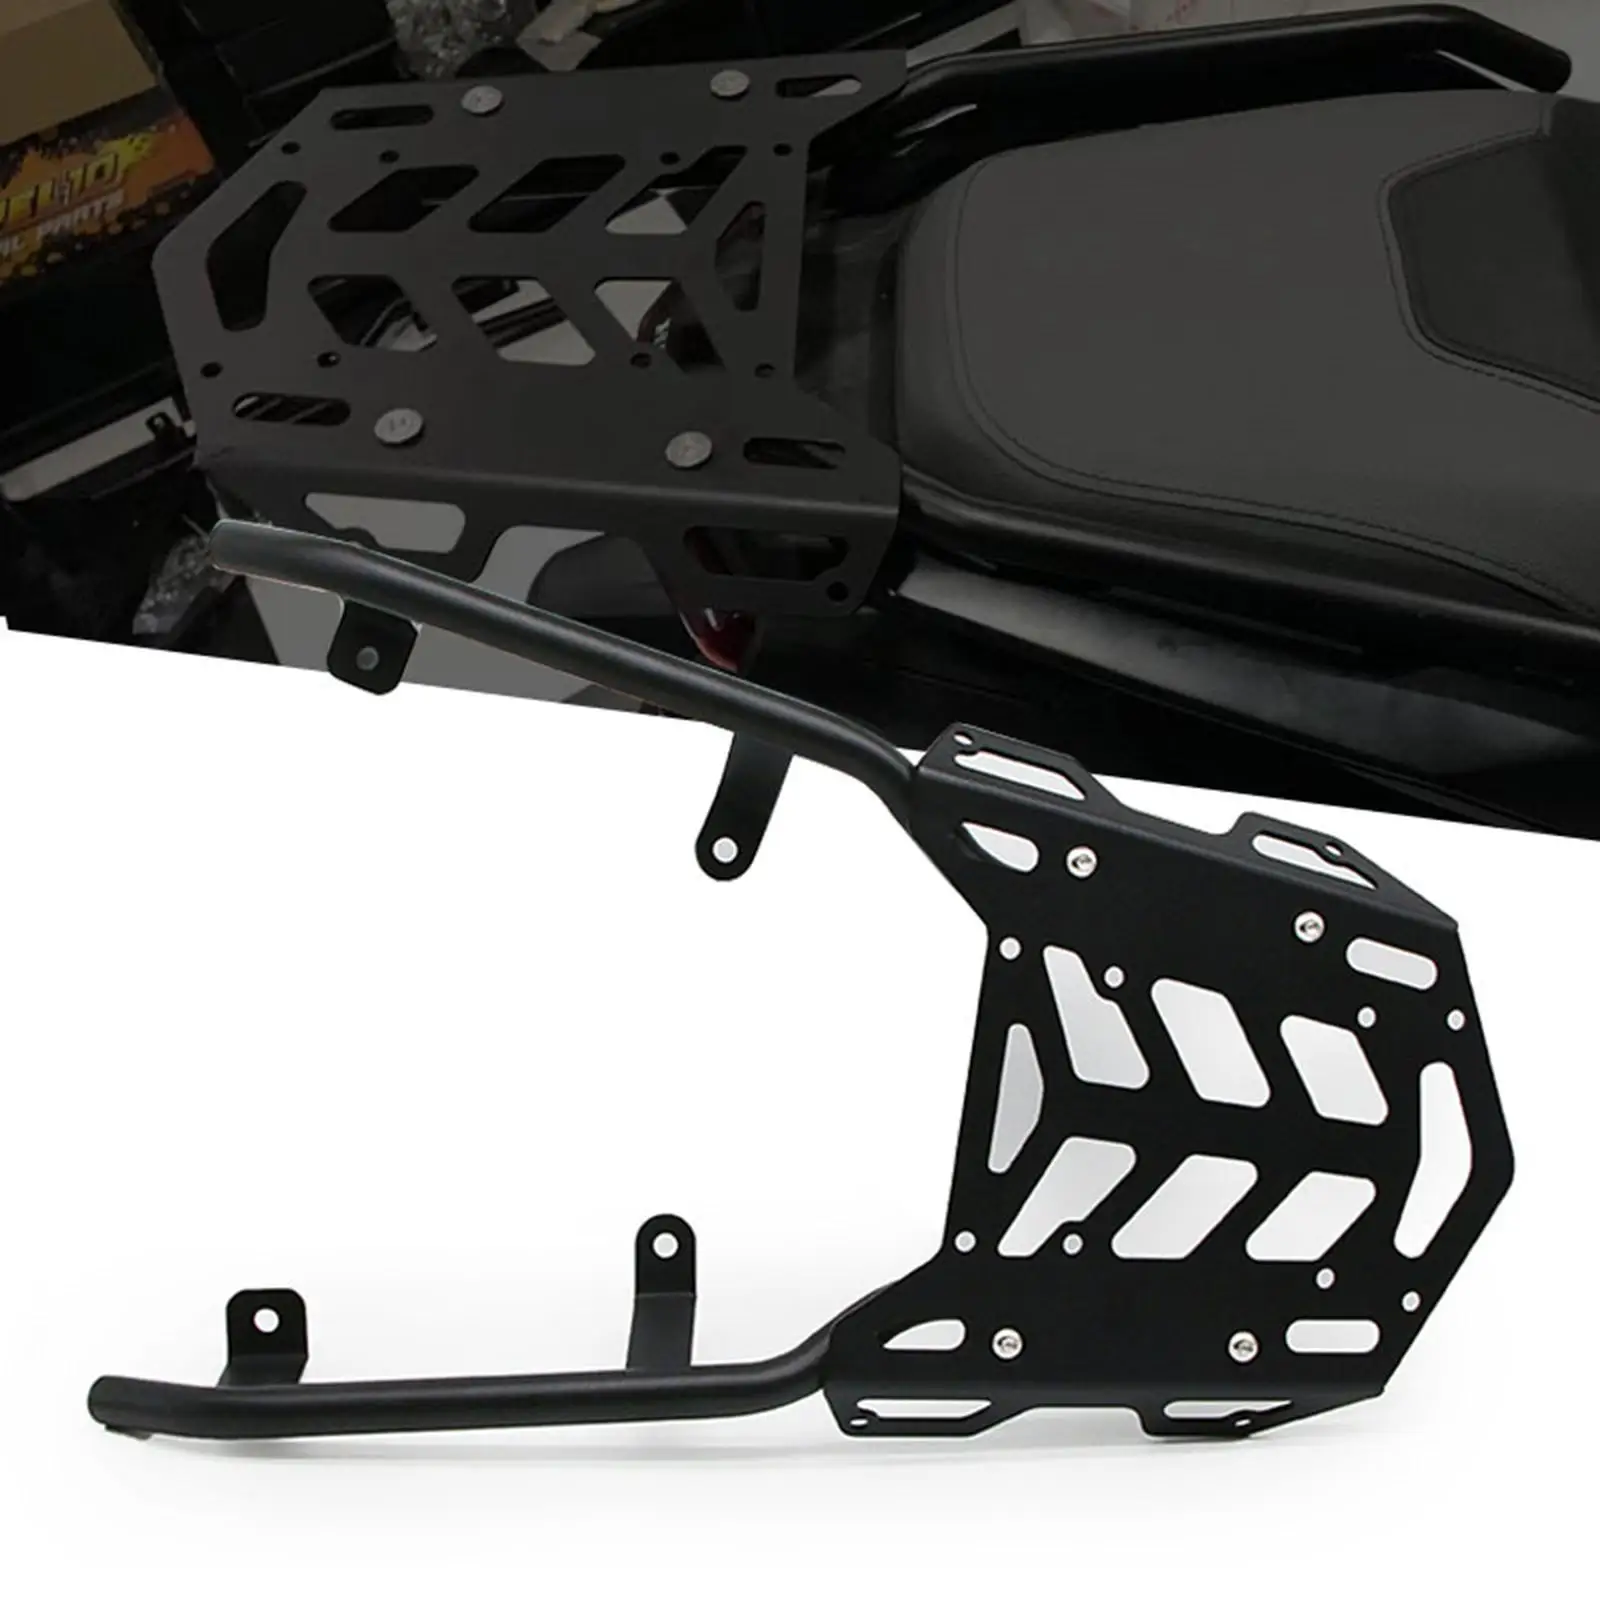 Motorcycle Rear Luggage Rack Tail Rack Support Carrier Shelf Bracket Cargo Frame Fits for Honda Adv 150 19-21 Parts Accessories